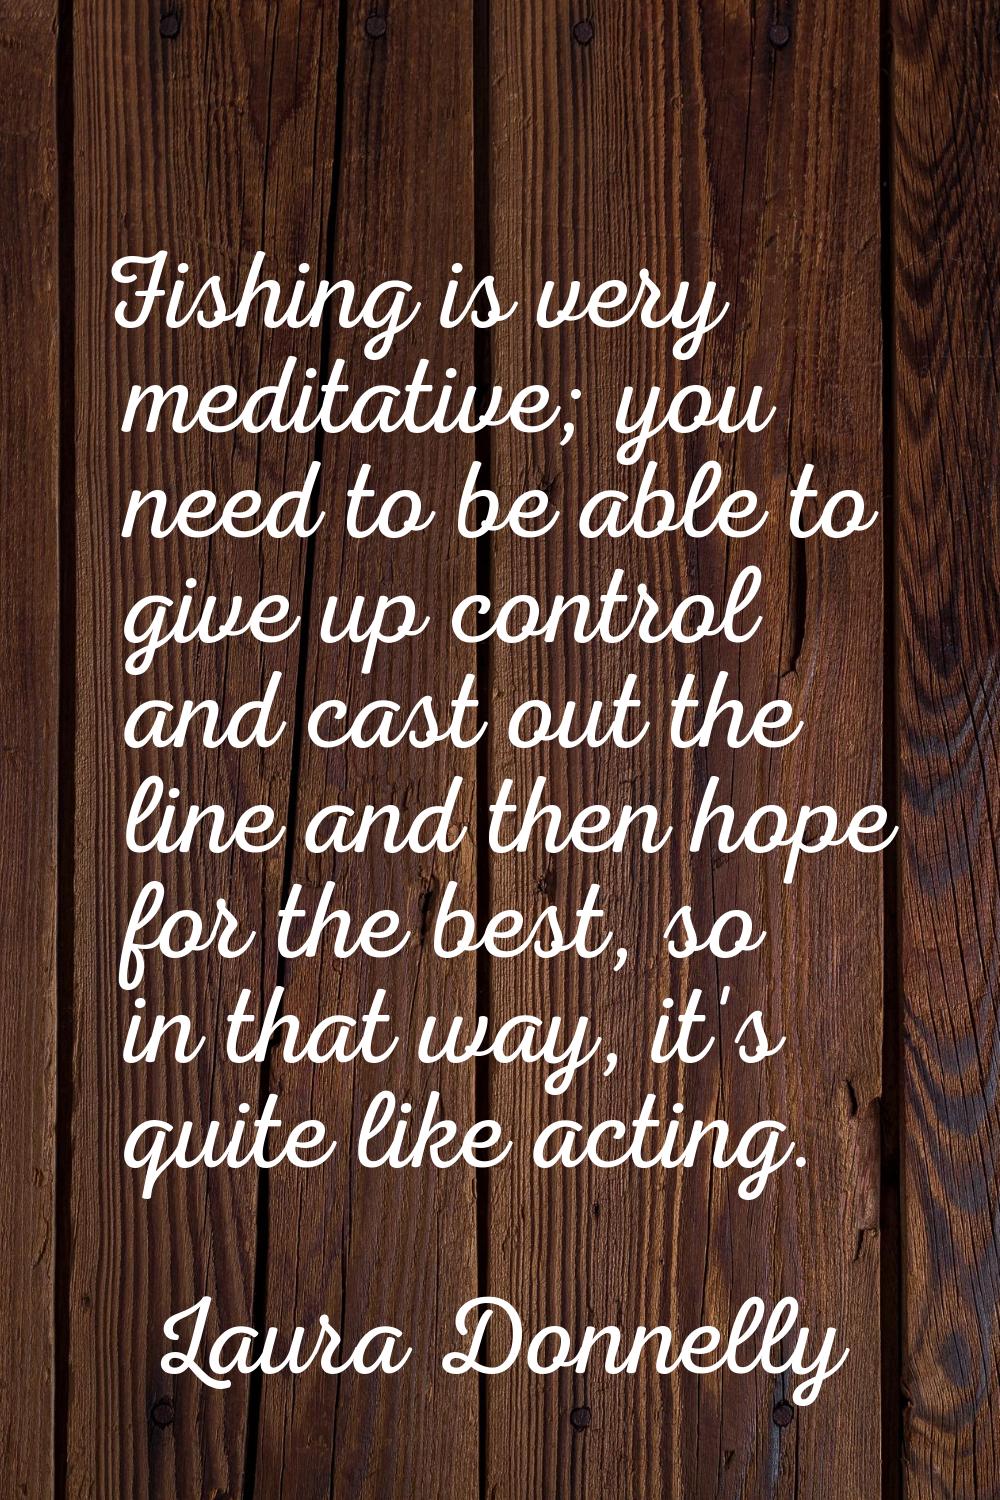 Fishing is very meditative; you need to be able to give up control and cast out the line and then h